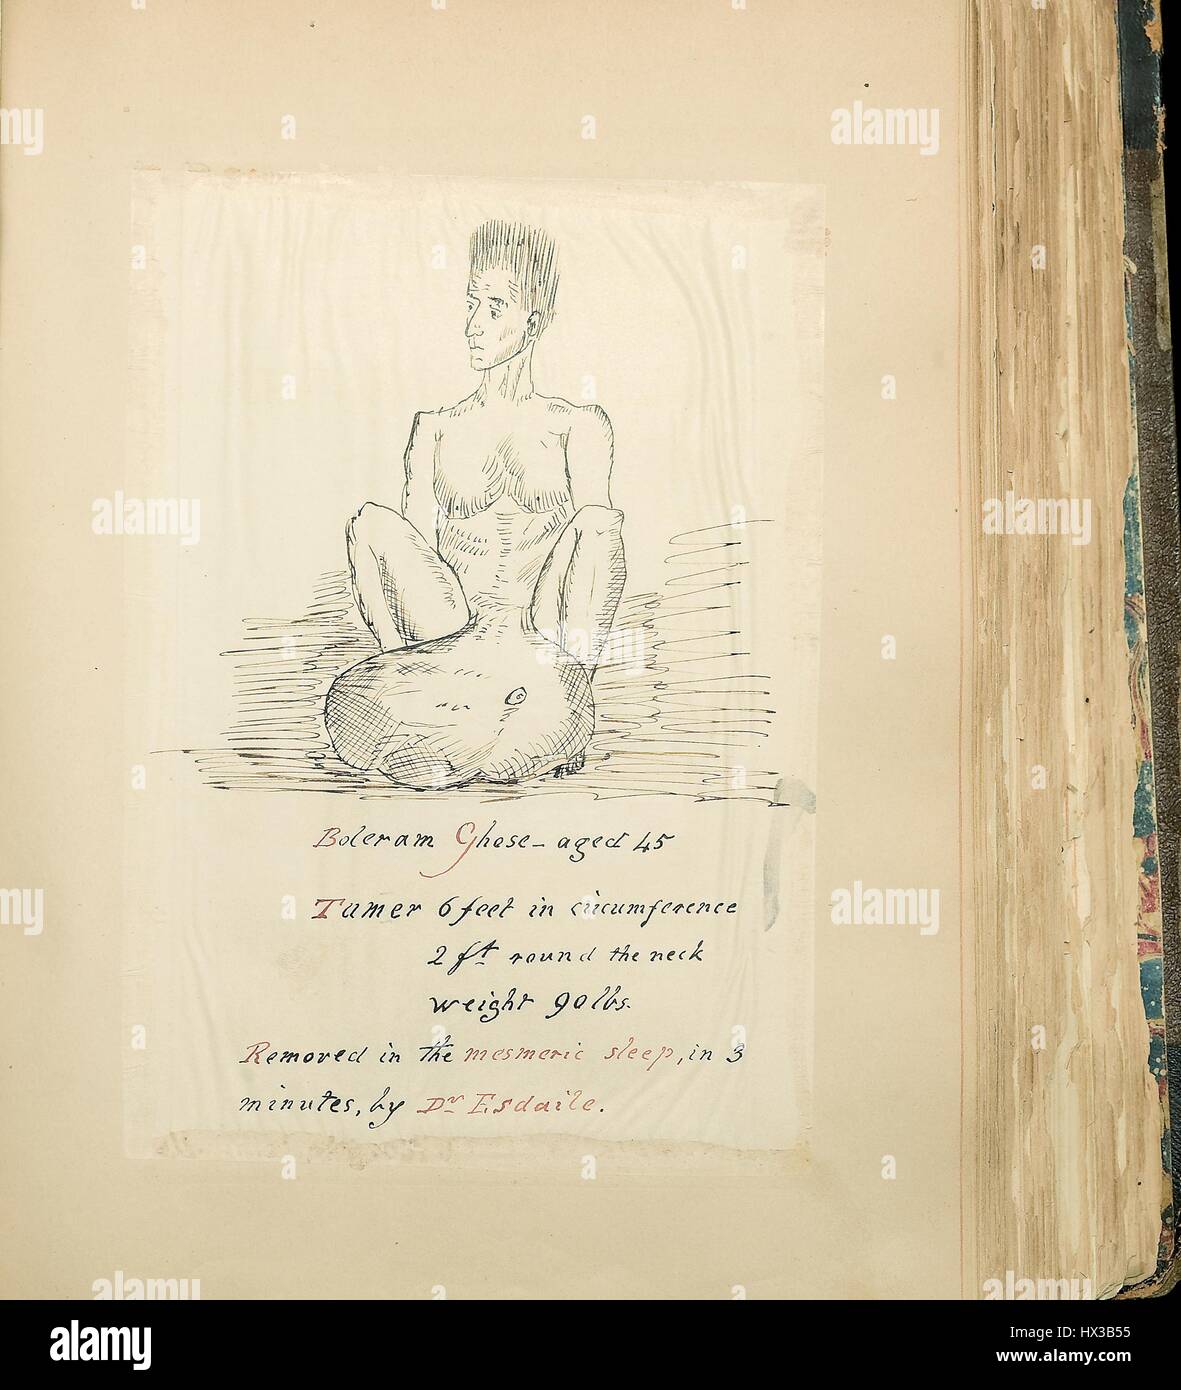 Drawing of Boleram Ghose, a man with a 90 lb tumor extending from his abdominal area, in 'Theodosius Purland, collection of materials on mesmerism.', 1854. Courtesy National Library of Medicine. Stock Photo